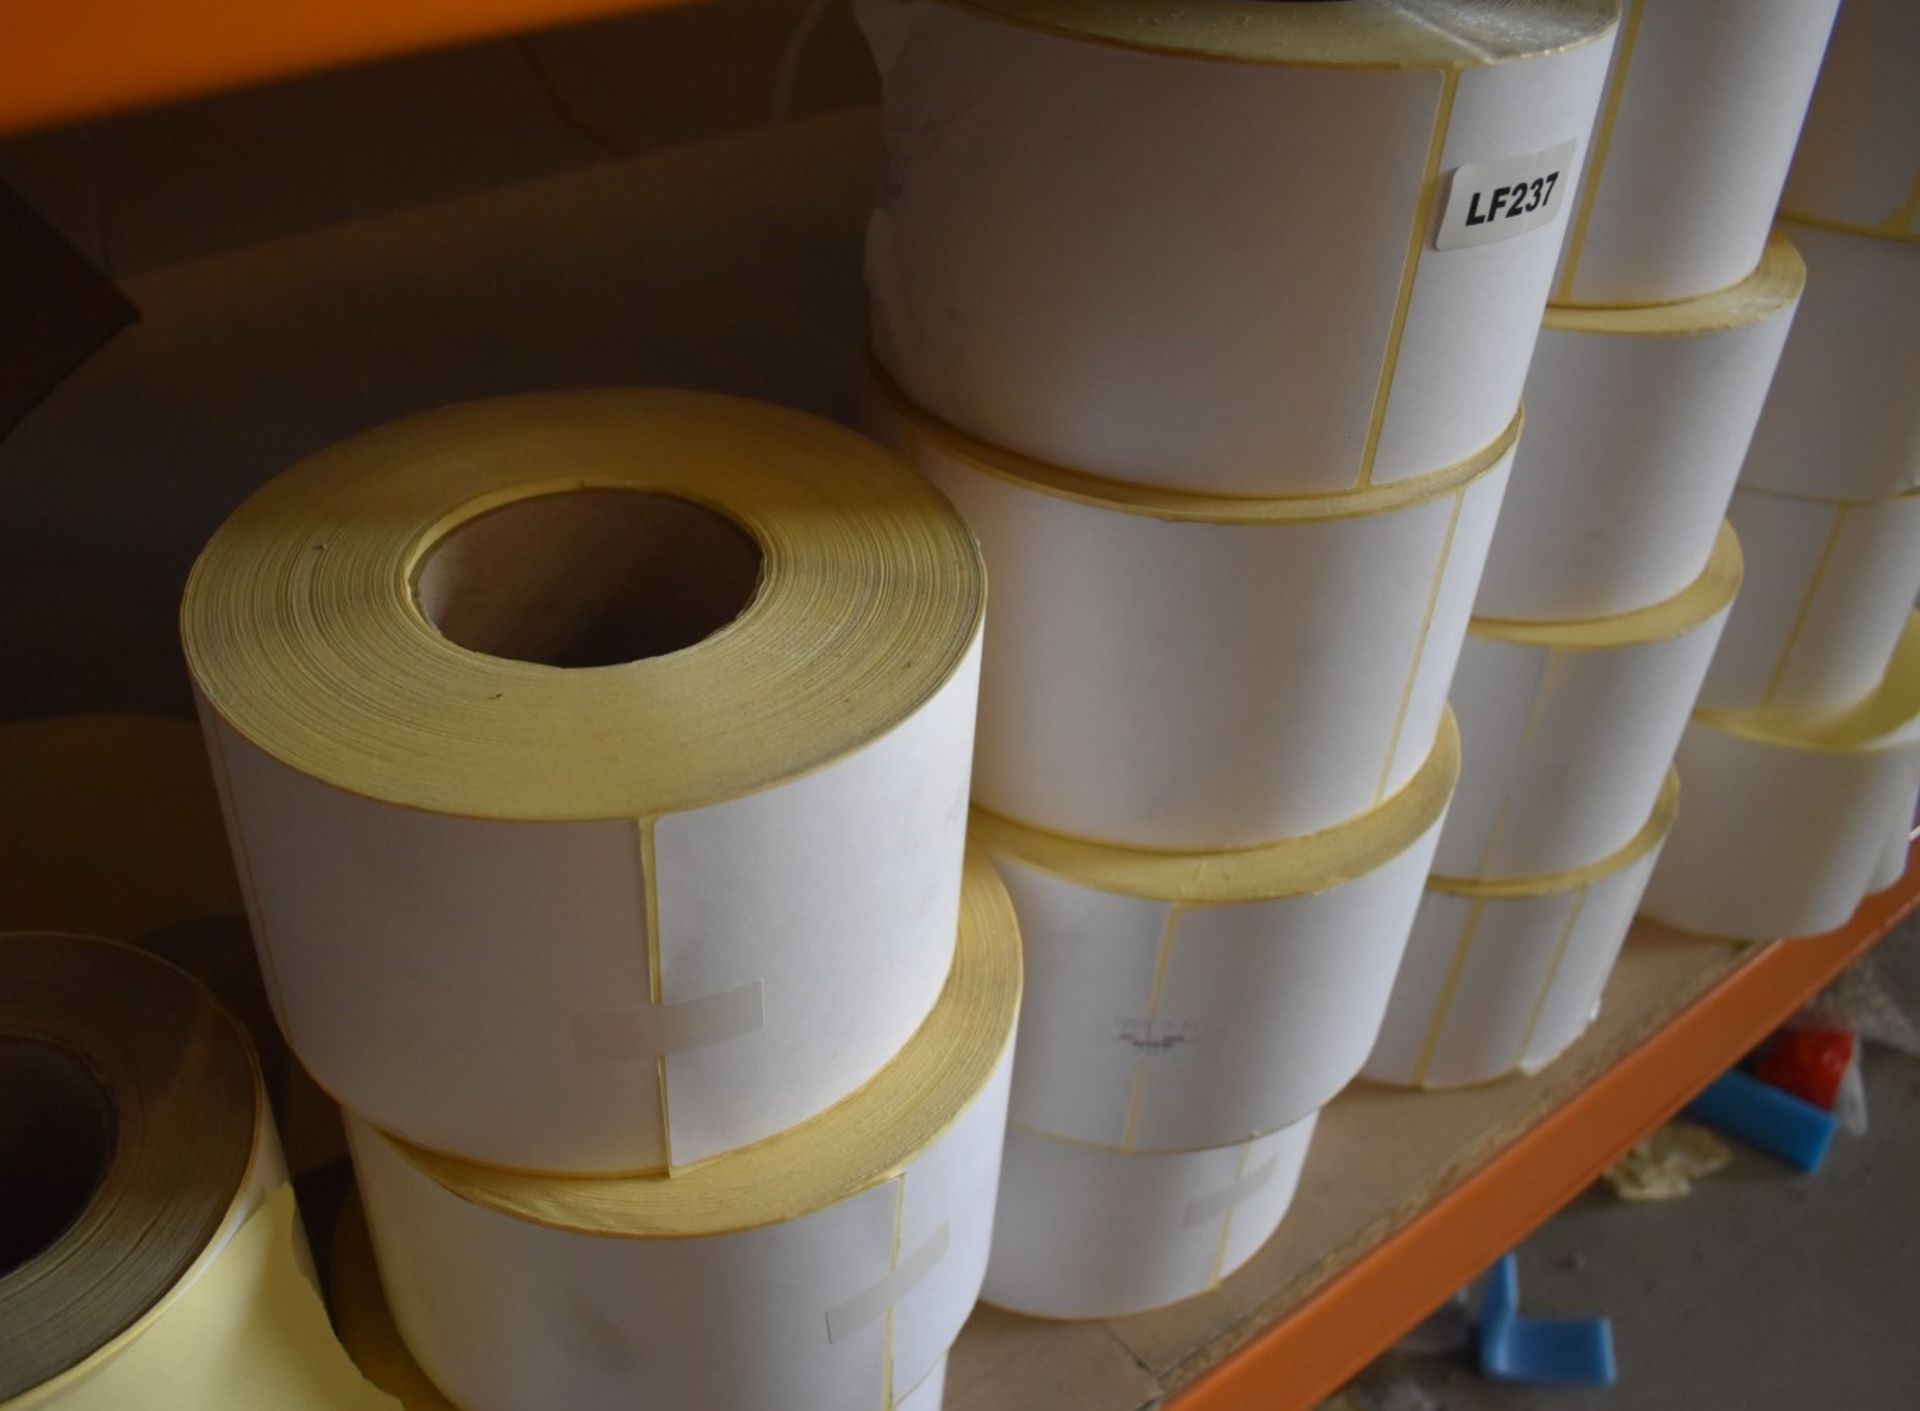 22 x Rolls of Thermal Printer Labels - Image 3 of 5